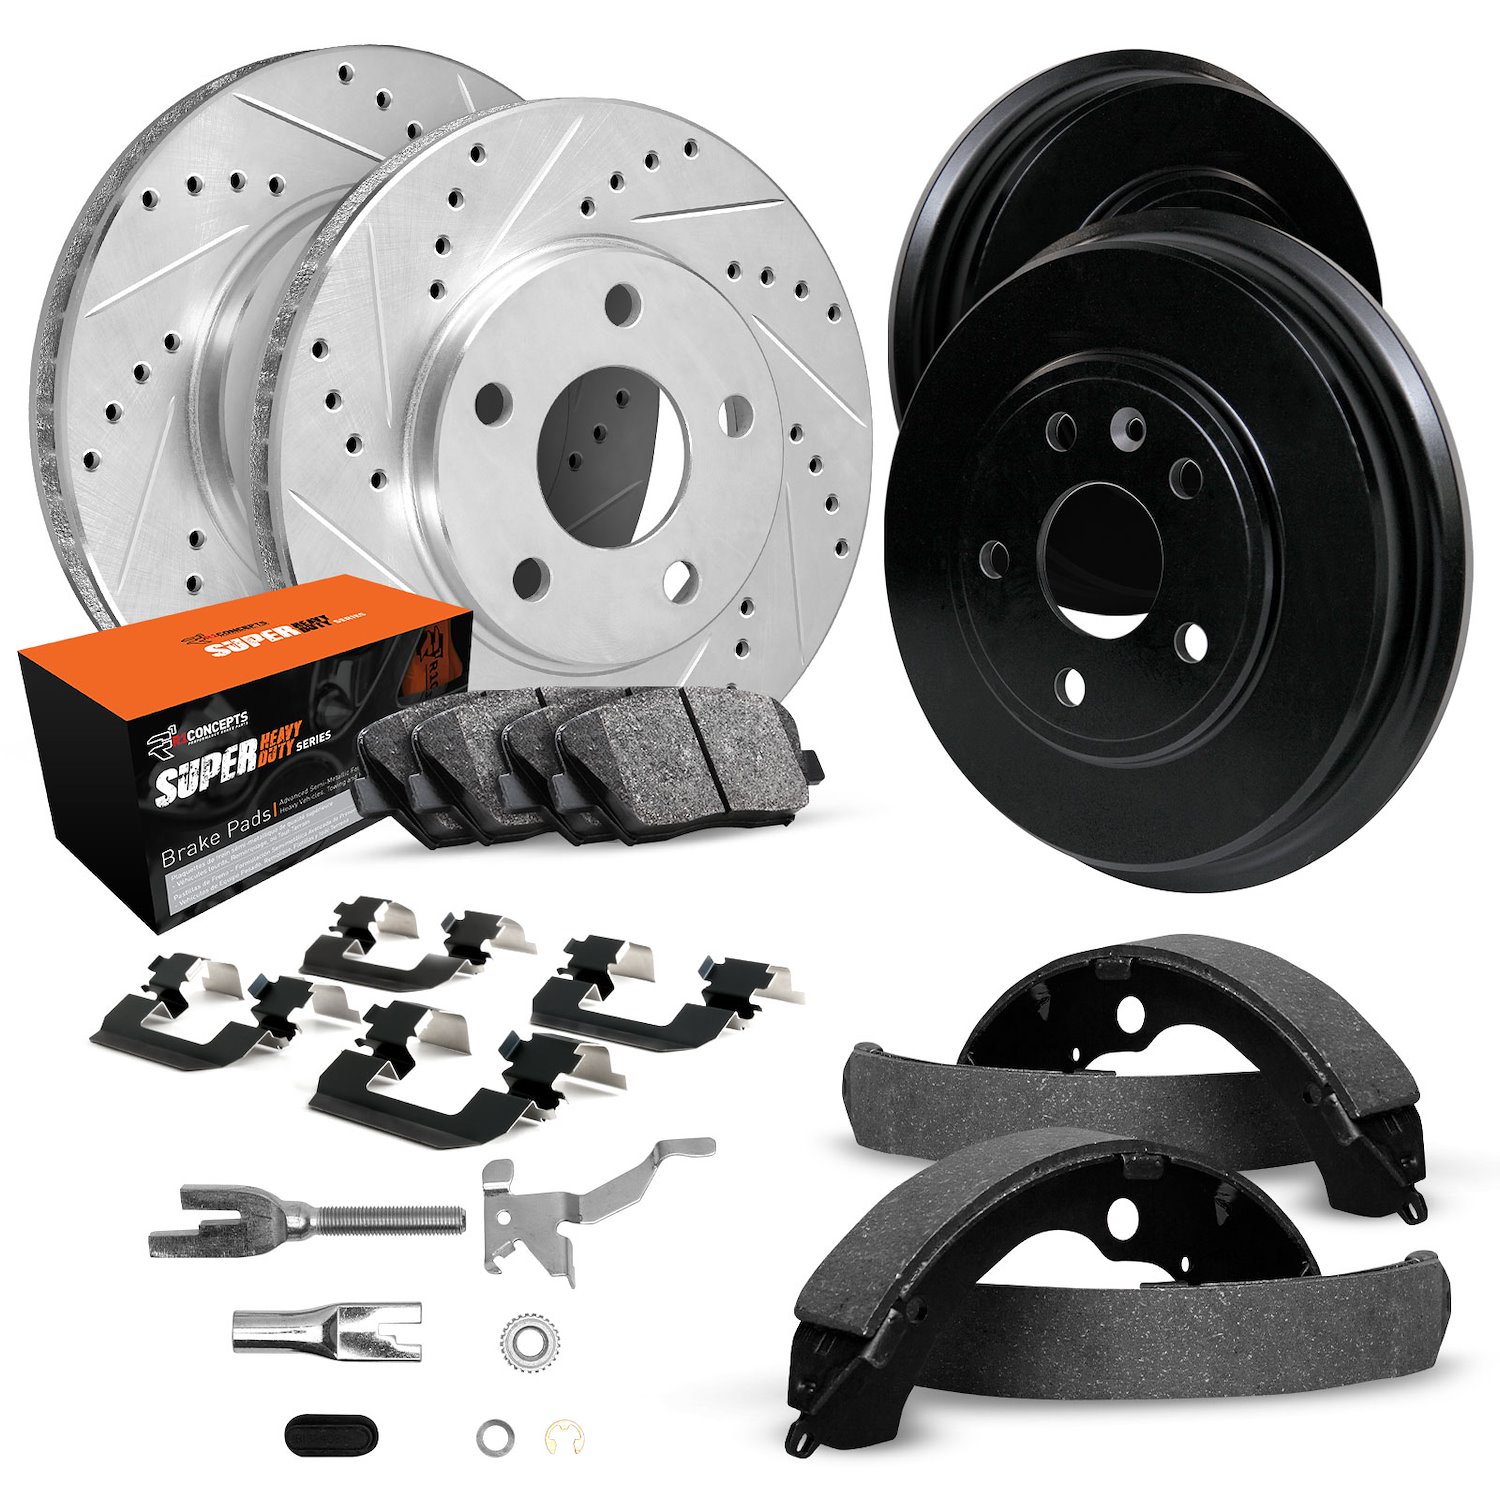 E-Line Drilled/Slotted Silver Rotor & Drum Set w/Super-Duty Pads, Shoes/Hardware/Adjusters, 1989-1989 Ford/Lincoln/Mercury/Mazda